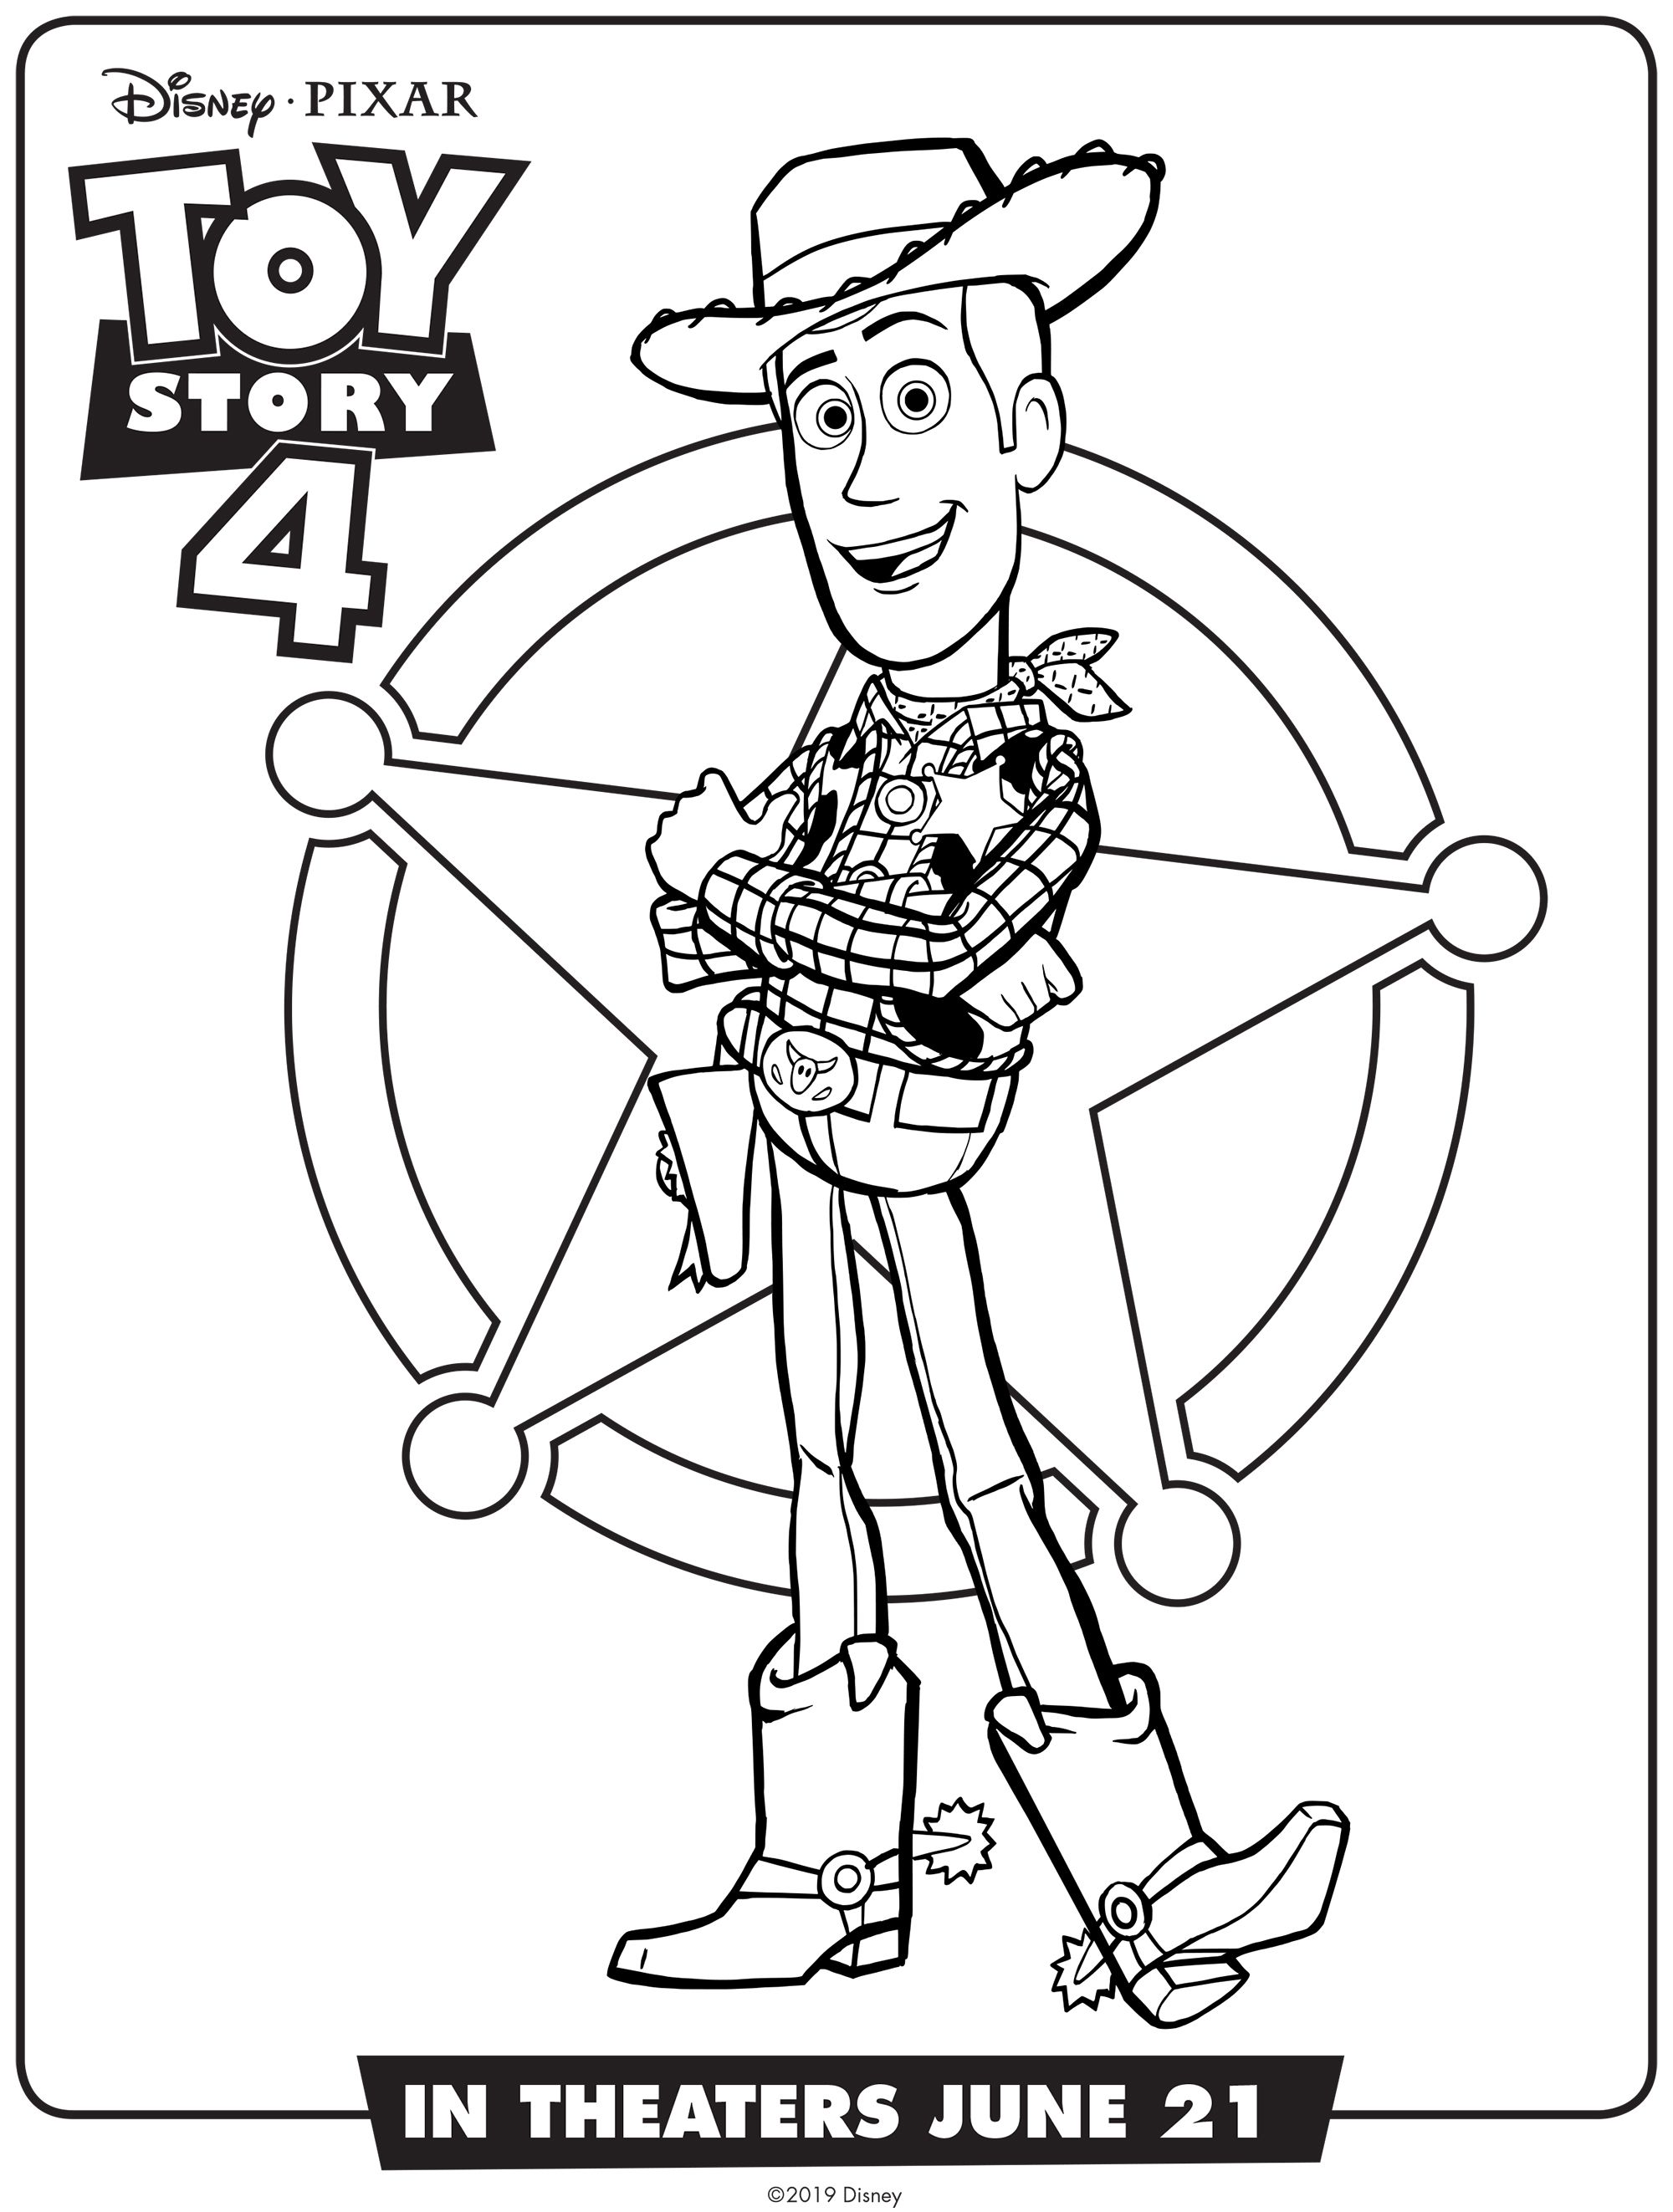 Toy Story 4 Woody Coloring Sheet #Disney | Toy story ...